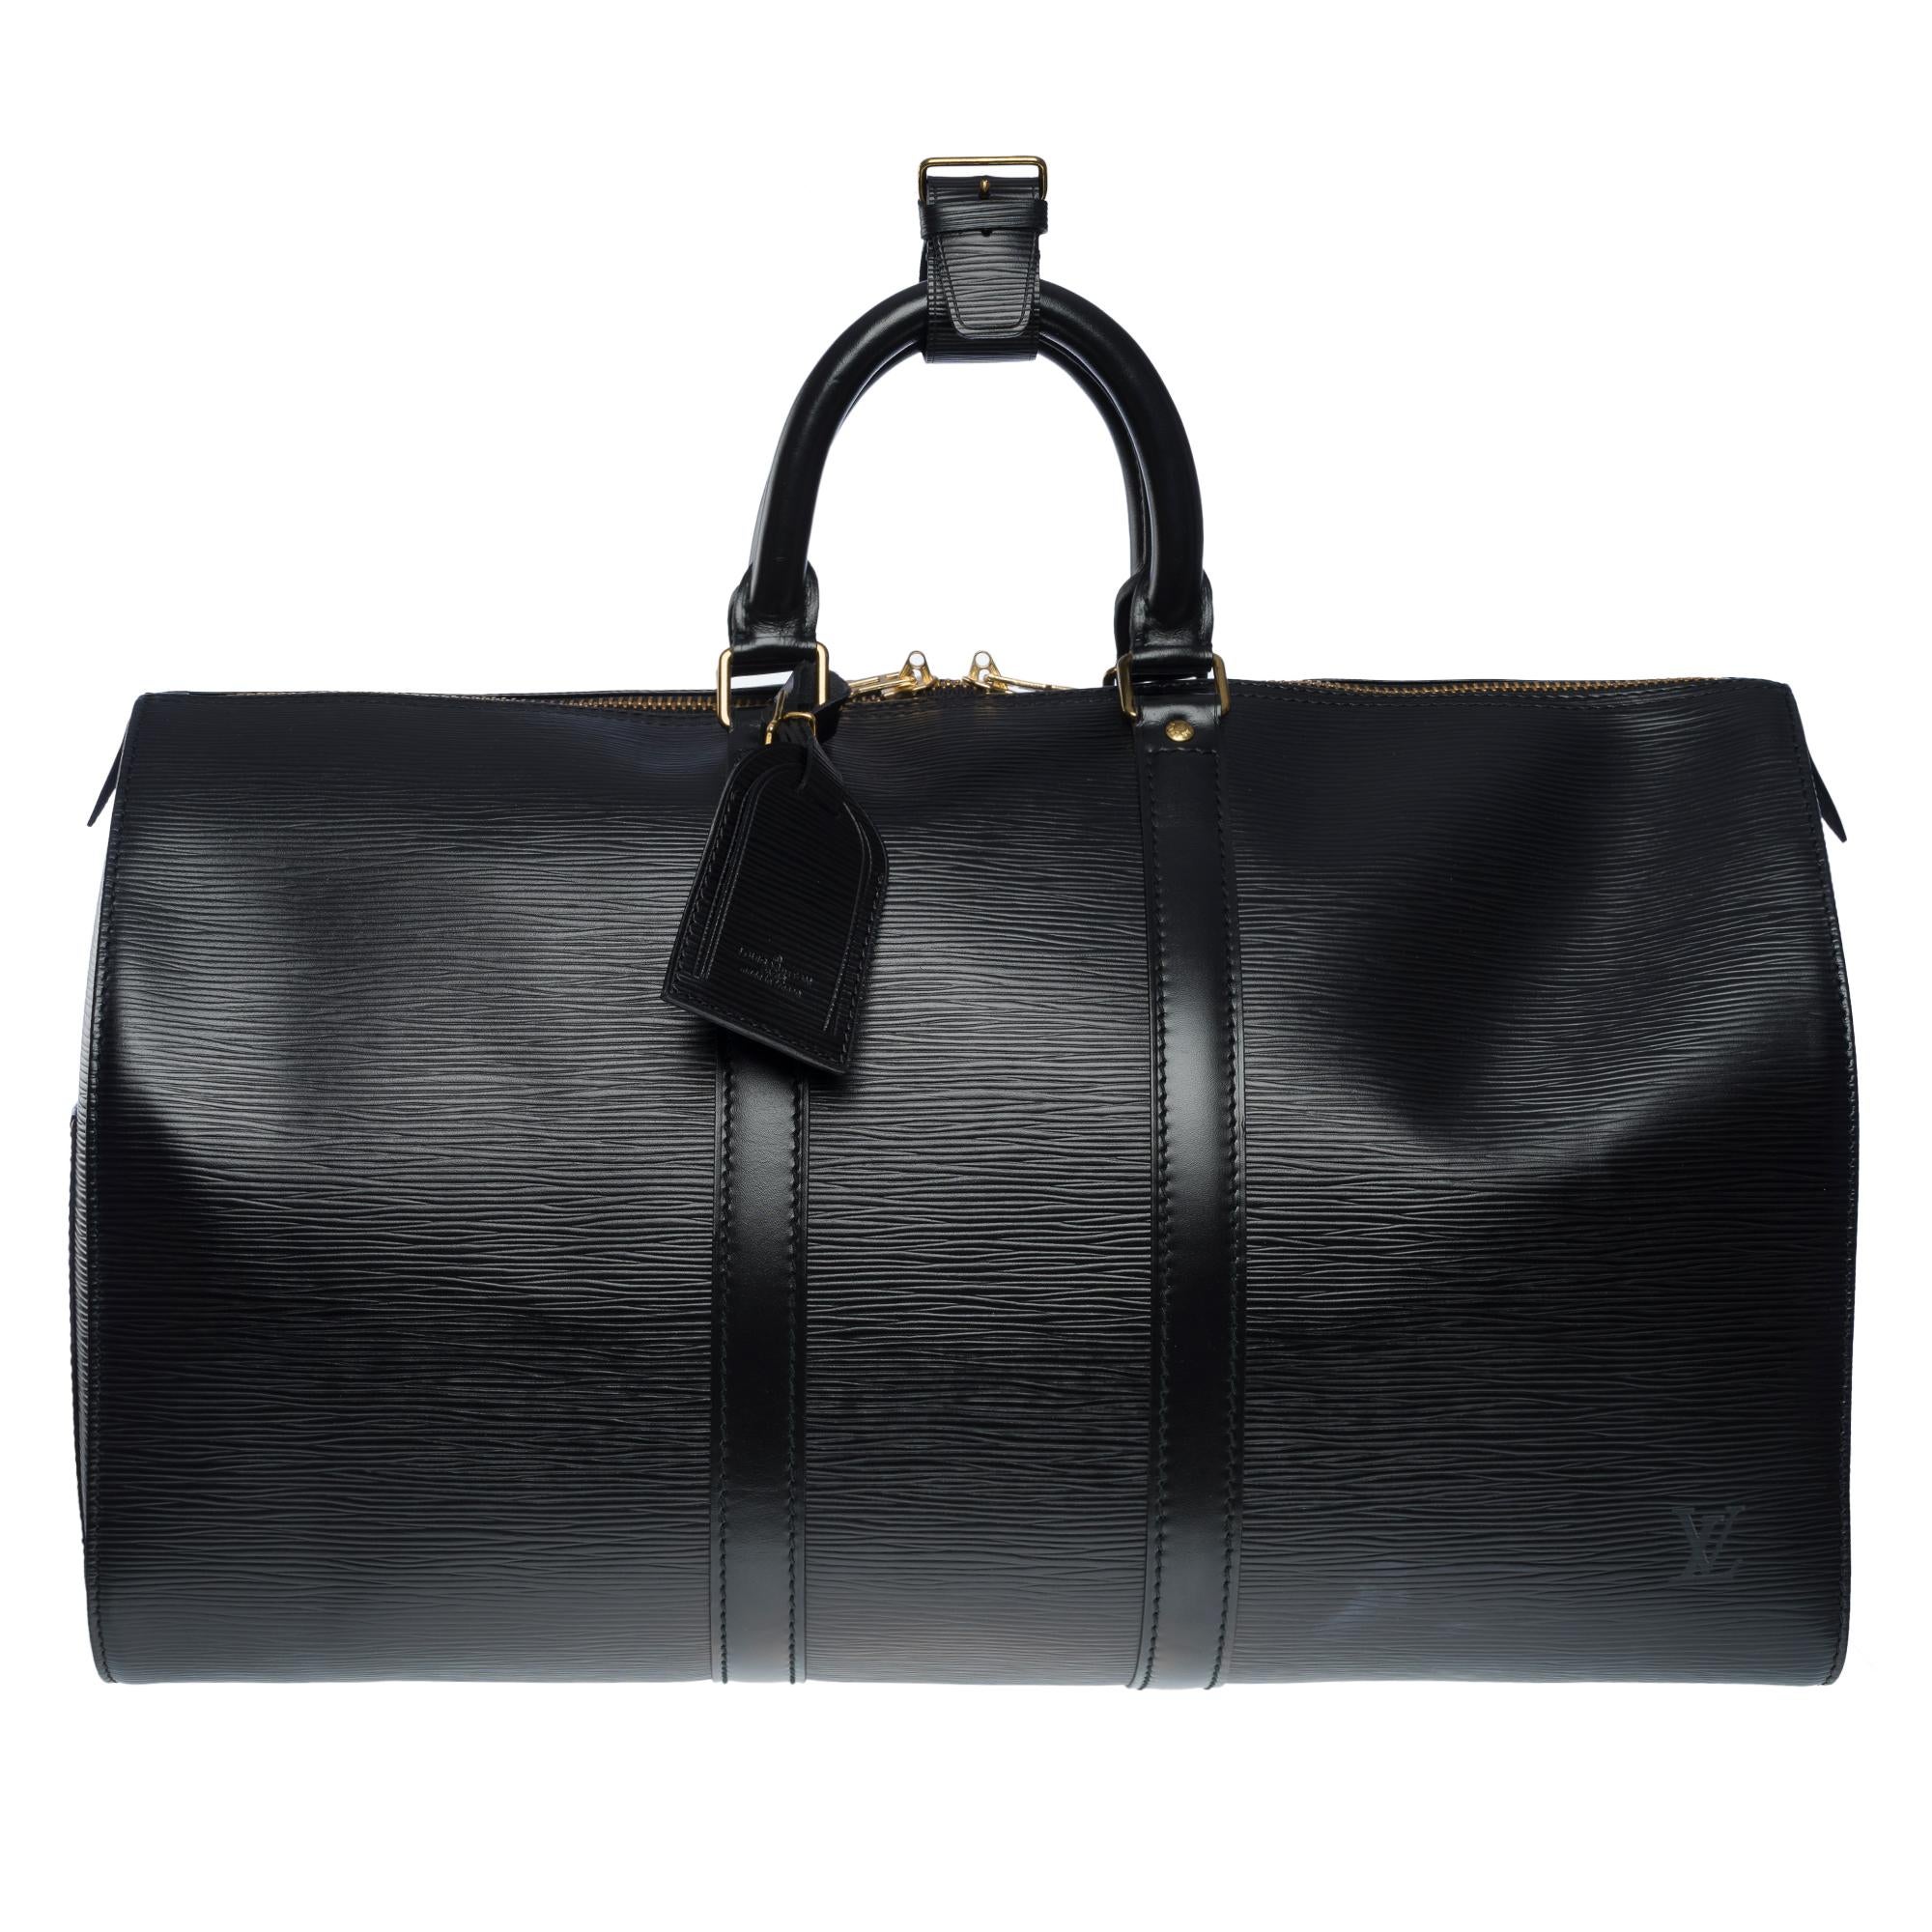 The very Chic Louis Vuitton Keepall travel bag 45 cm in black epi leather, double zipper sliders, double black leather handle allowing a hand carry
Zip closure
A left side outer patch pocket
Black suede inner lining
Signature “LOUIS VUITTON, Made in